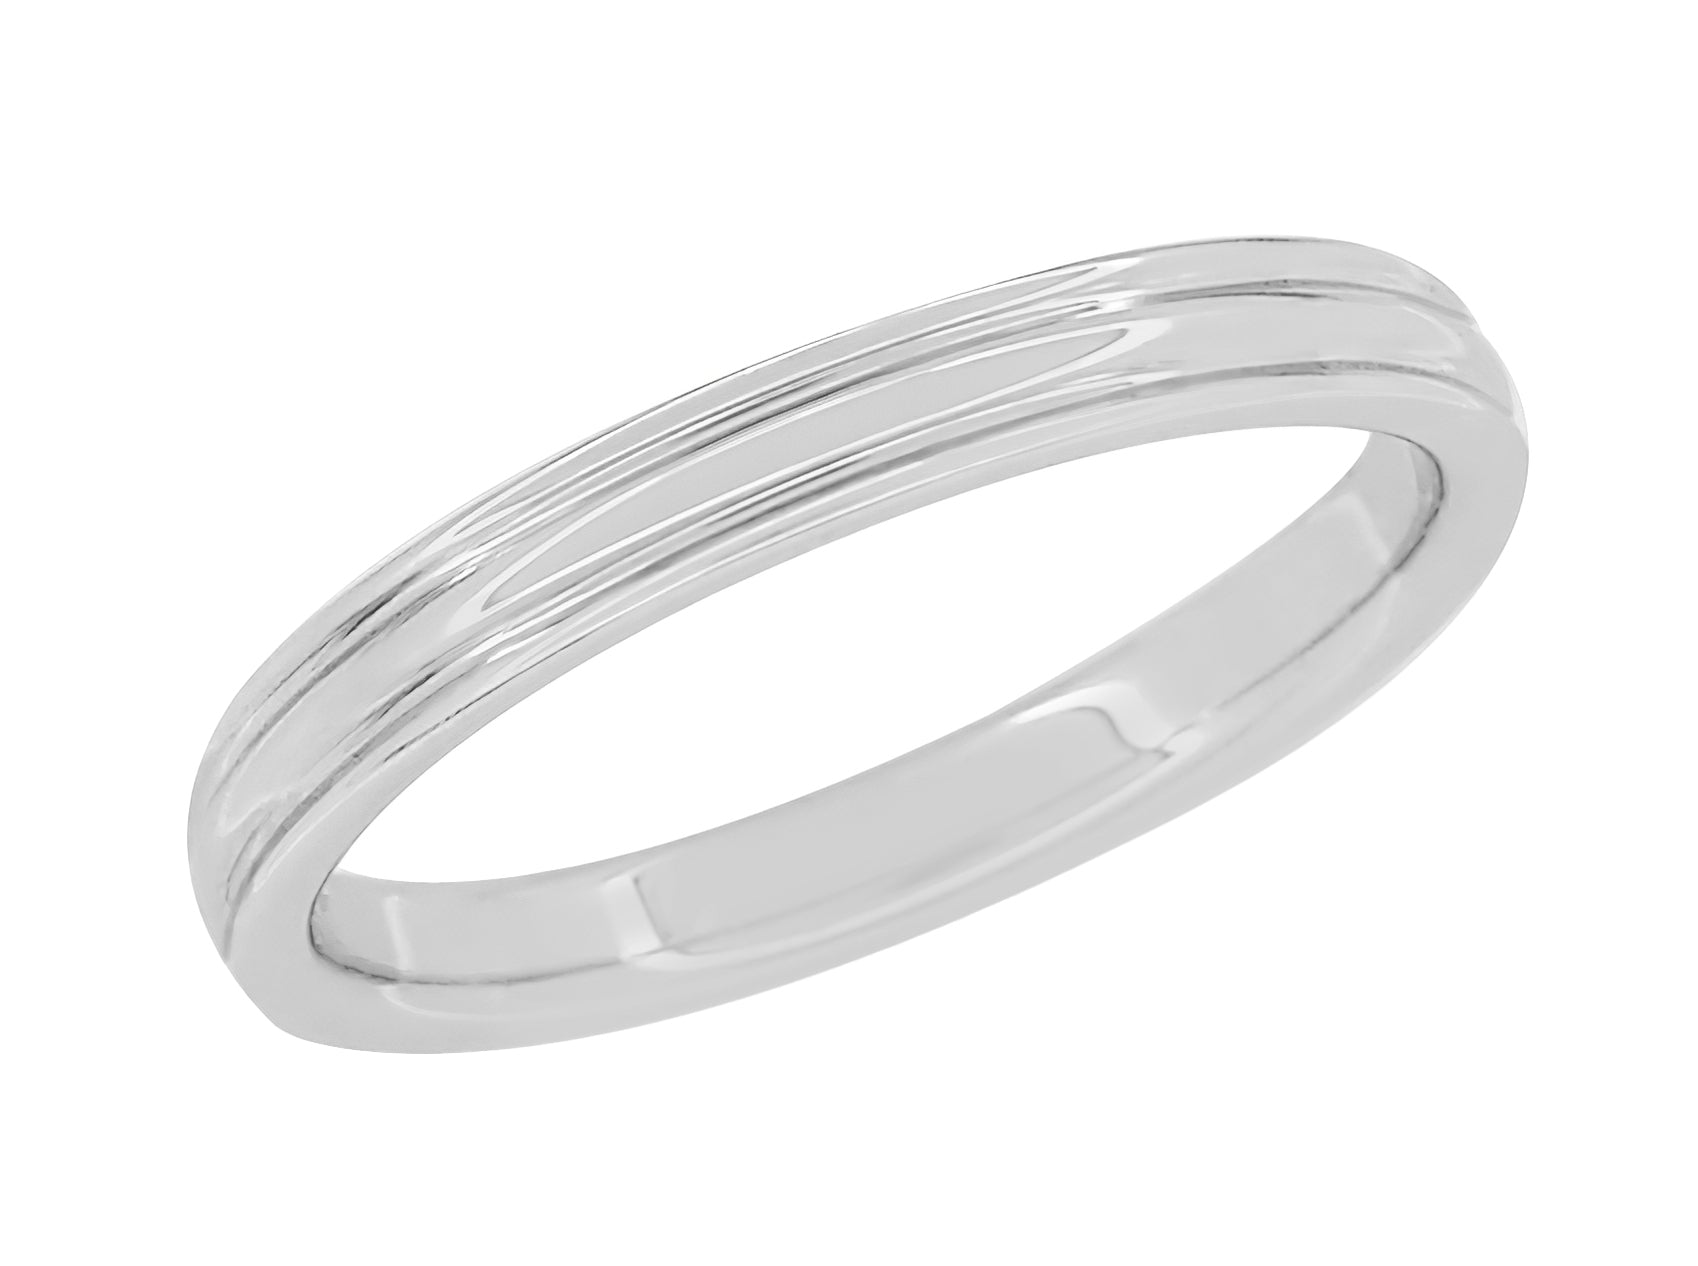 1950's Retro Moderne 4mm Double Grooved Wedding Band Ring in White Gold - 14K or 18K - Item: R912 - Image: 2